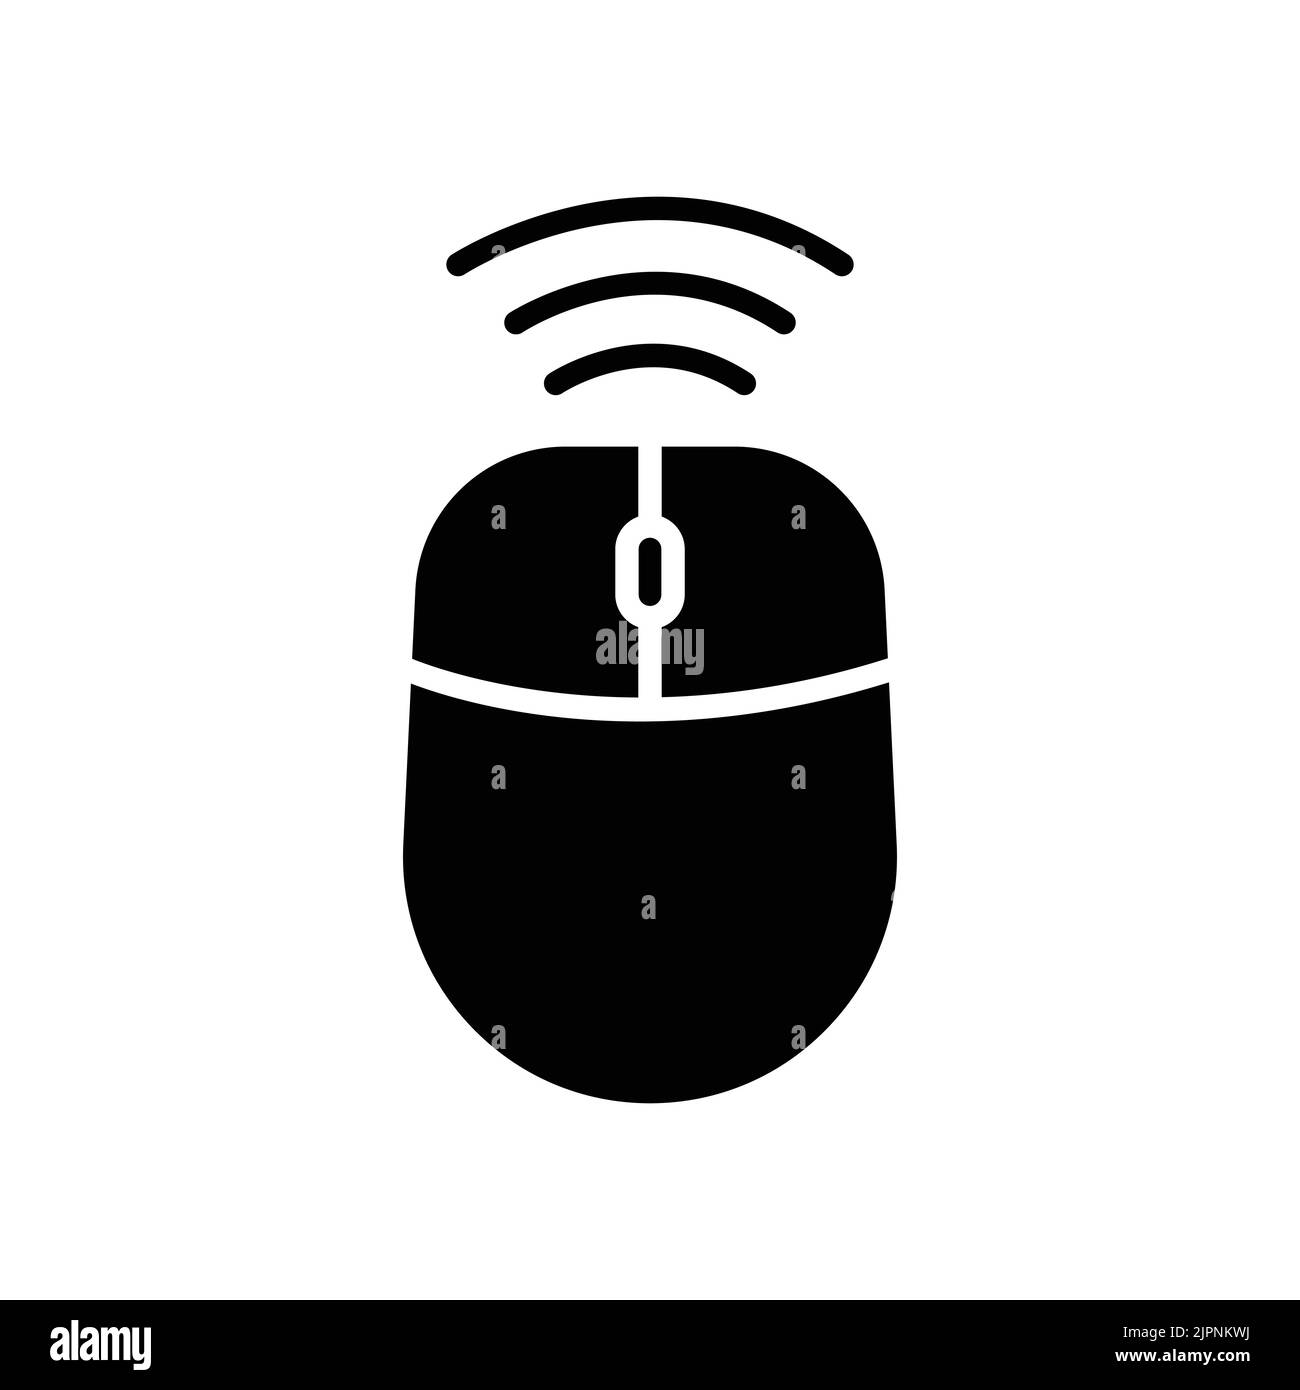 Computer mouse icon with signal. icon related to technology. smart device. Glyph icon style, solid. Simple design editable Stock Vector